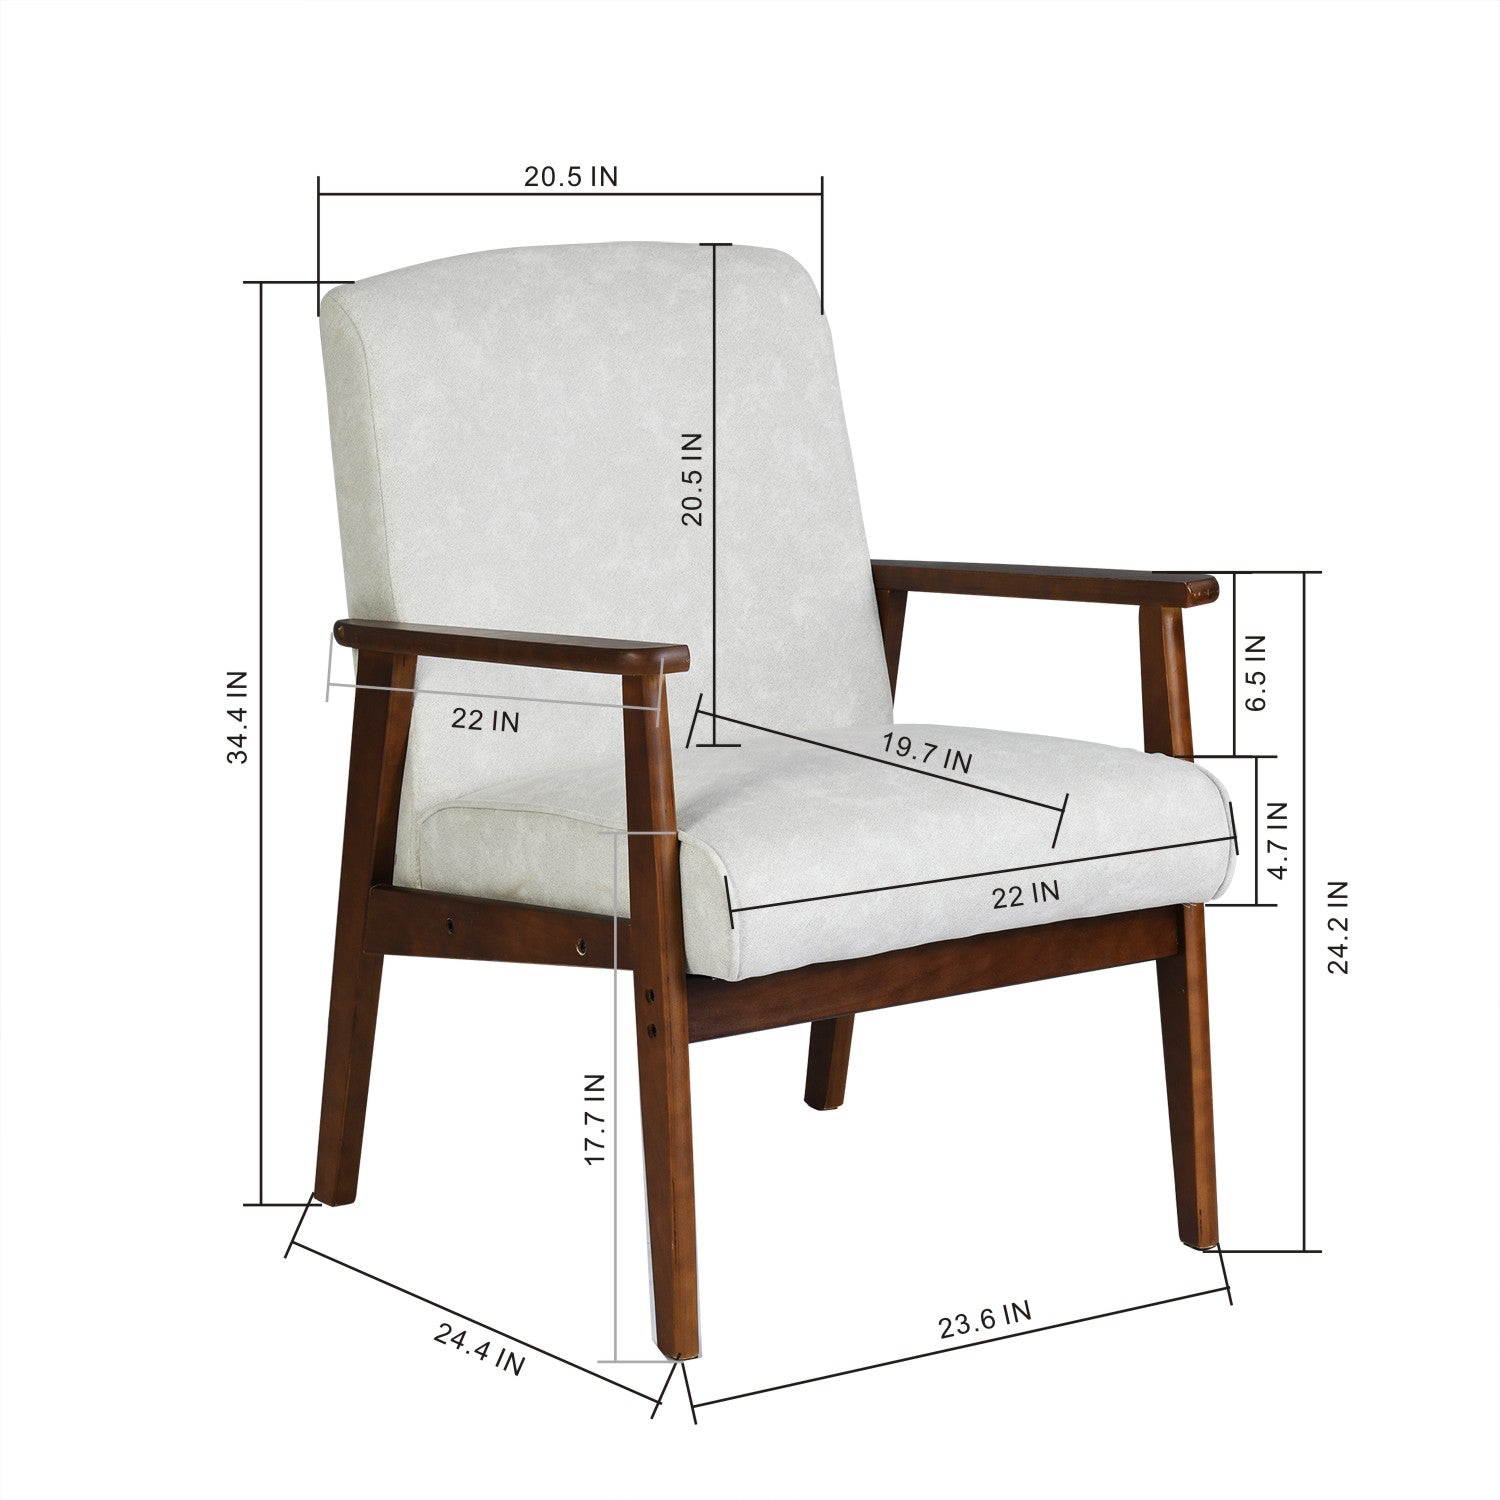 Bruqax Wooden Frame Accent Chair